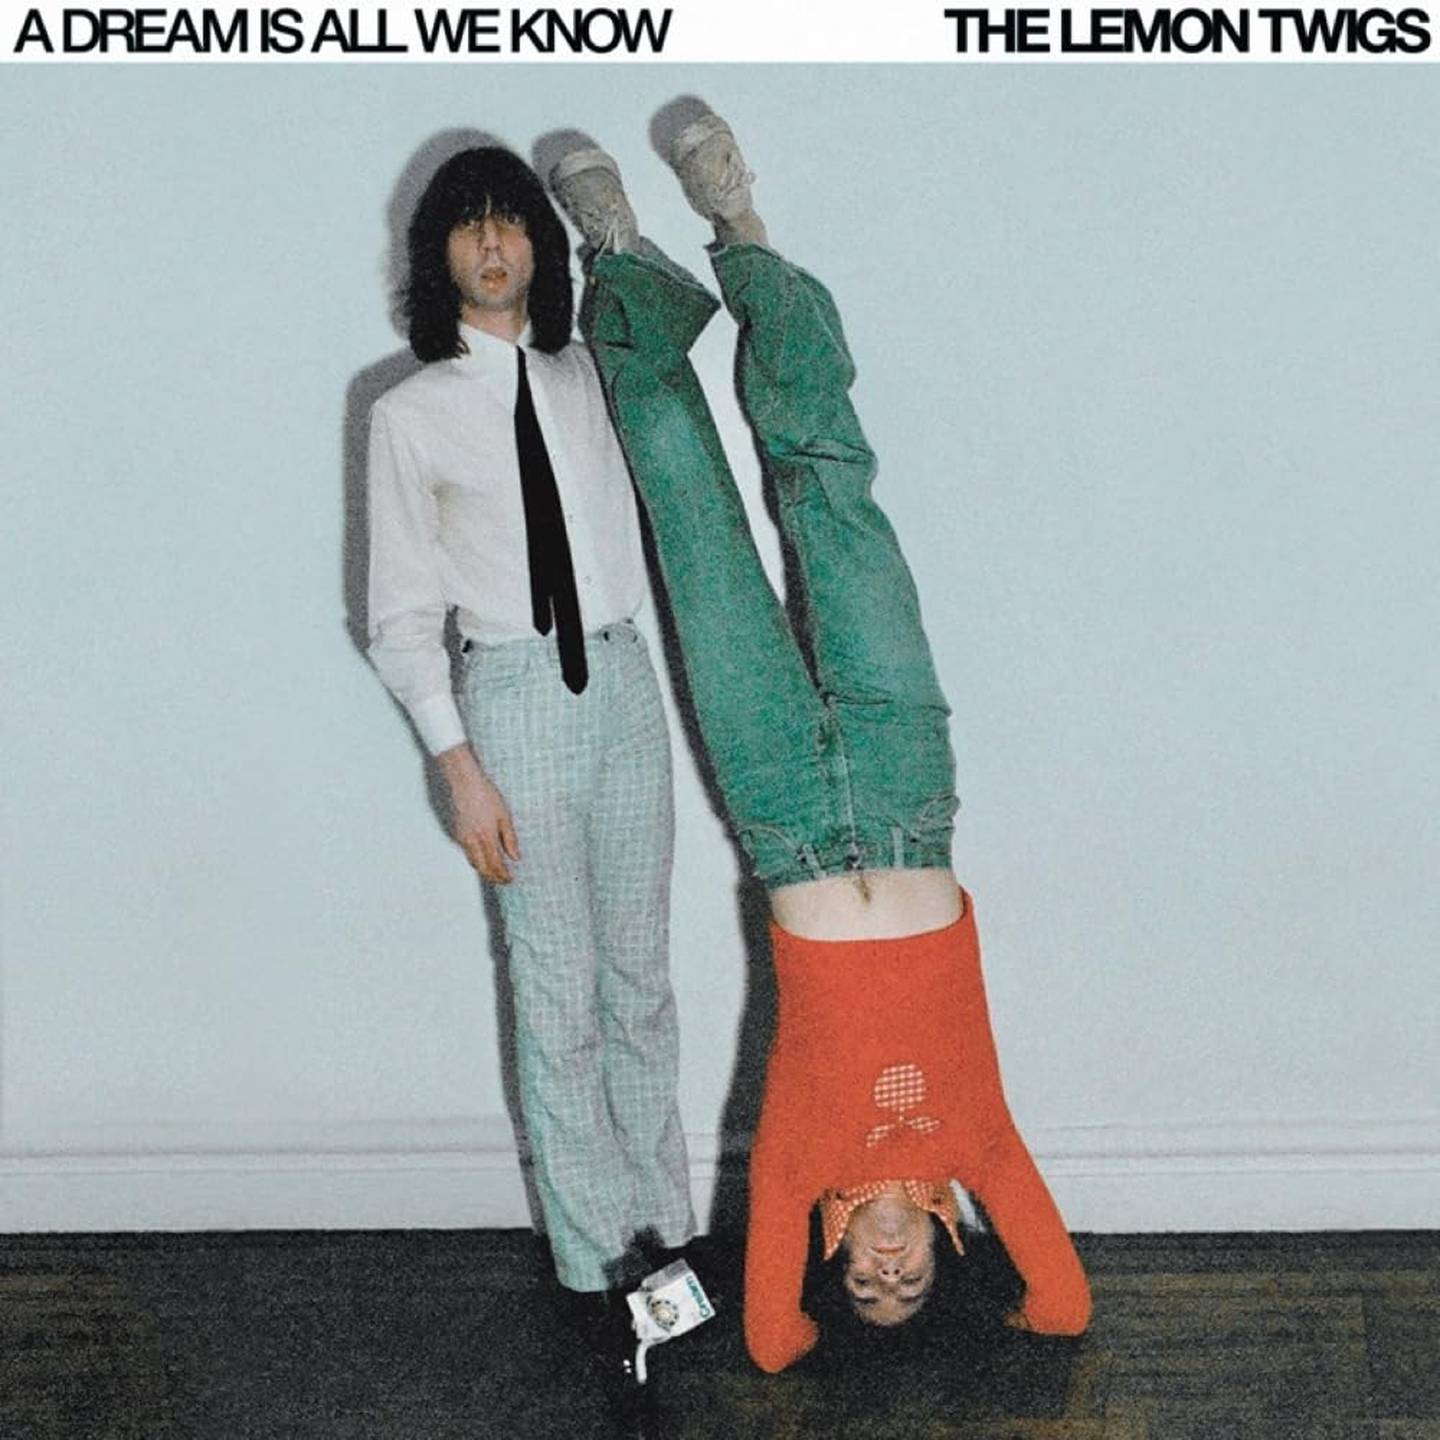 The Lemon Twigs: A Dream Is All I Know